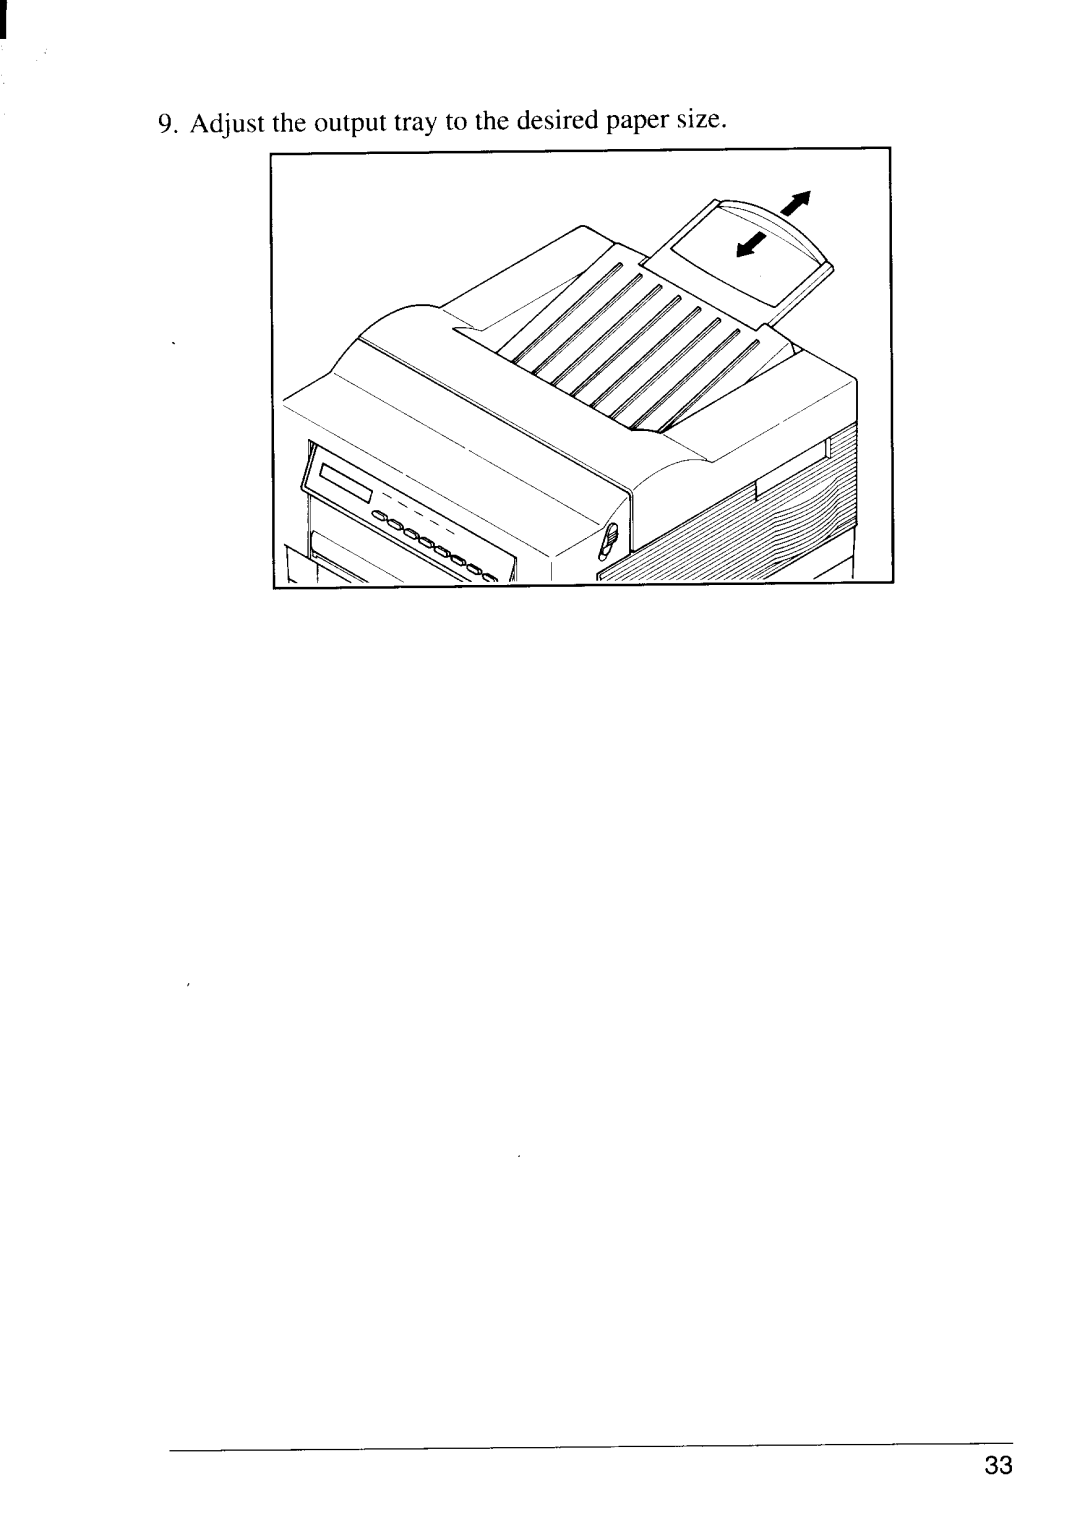 Star Micronics LS-5 TT, LS-5 EX operation manual Adjust the output tray to the desired paper size 